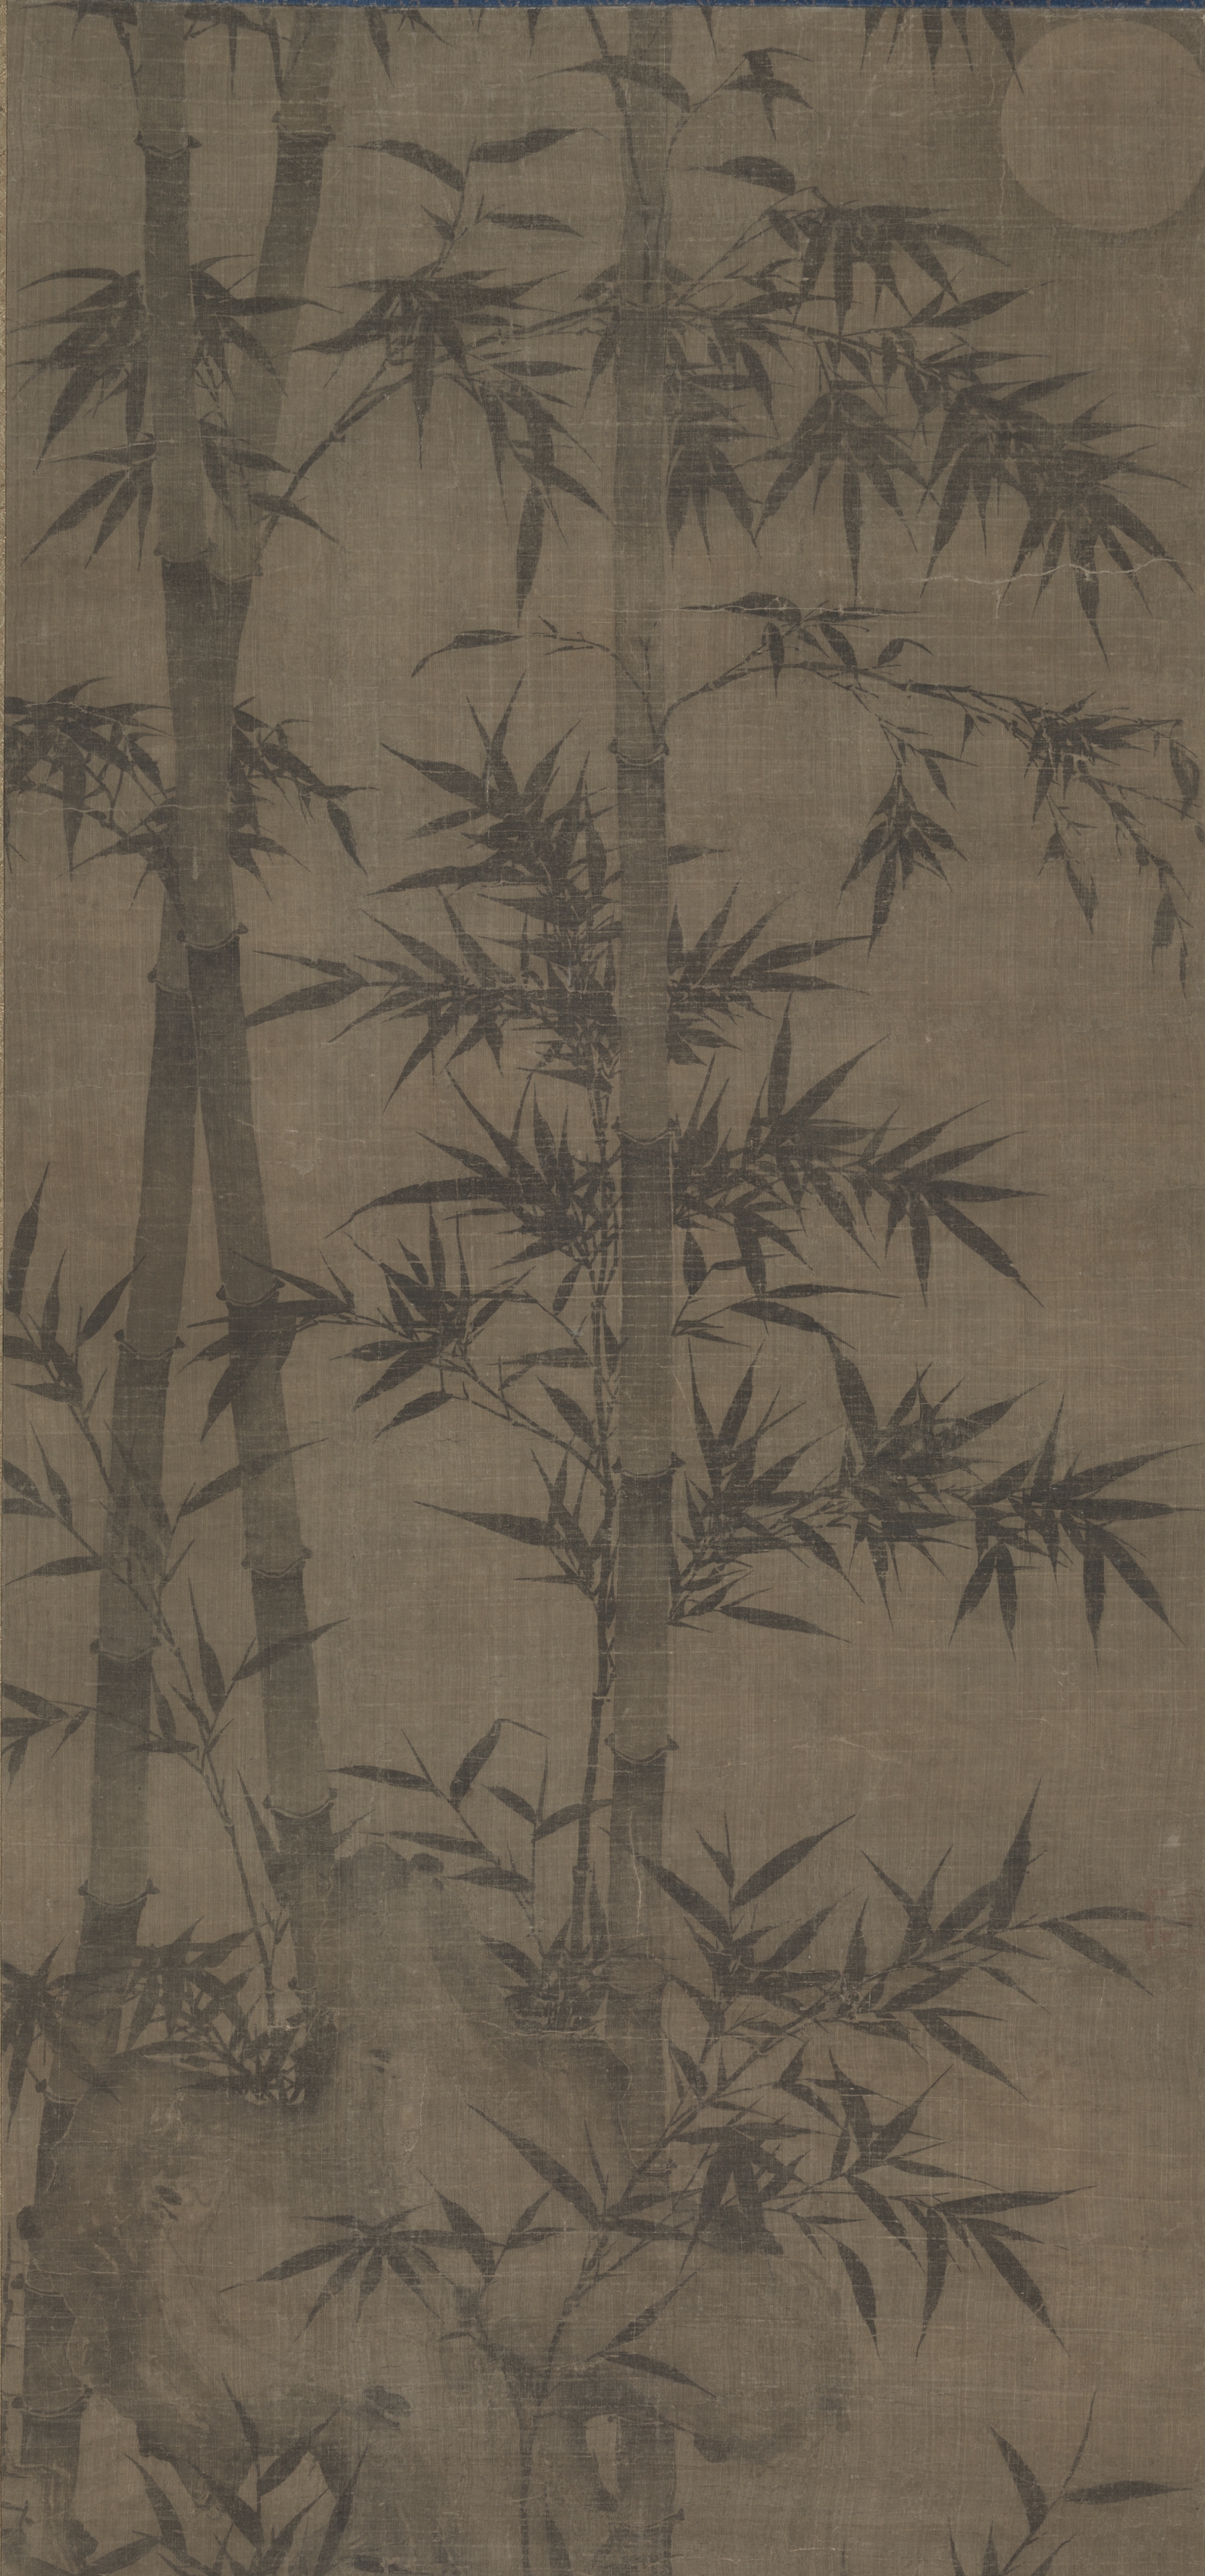 Bamboo in Four Seasons: Spring